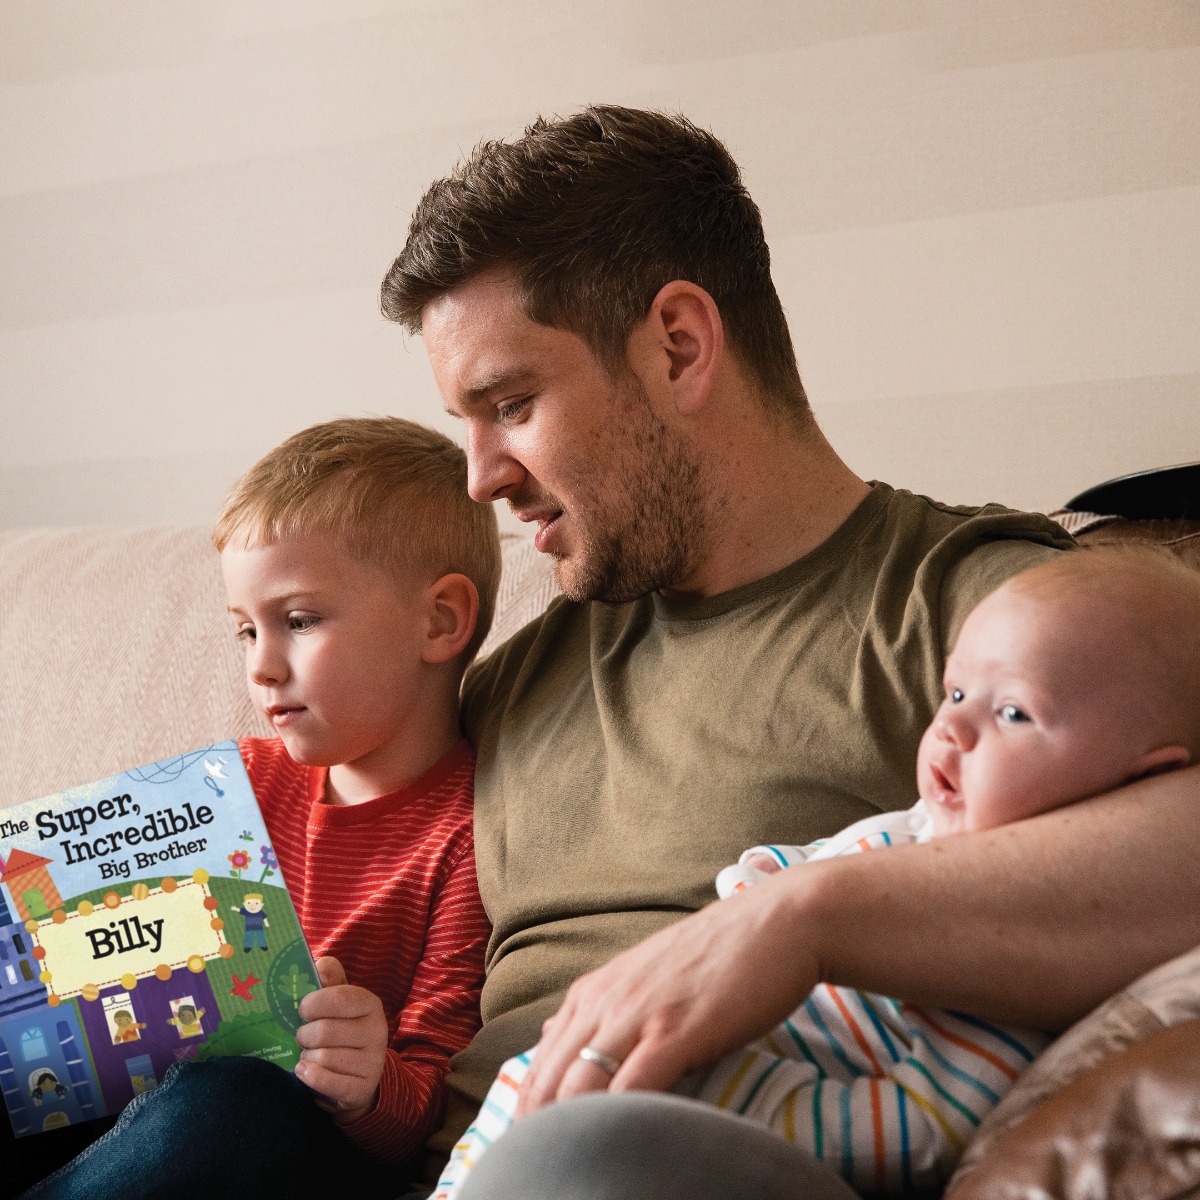 The Super, Incredible Big Brother of Twins Personalized Book and Medal